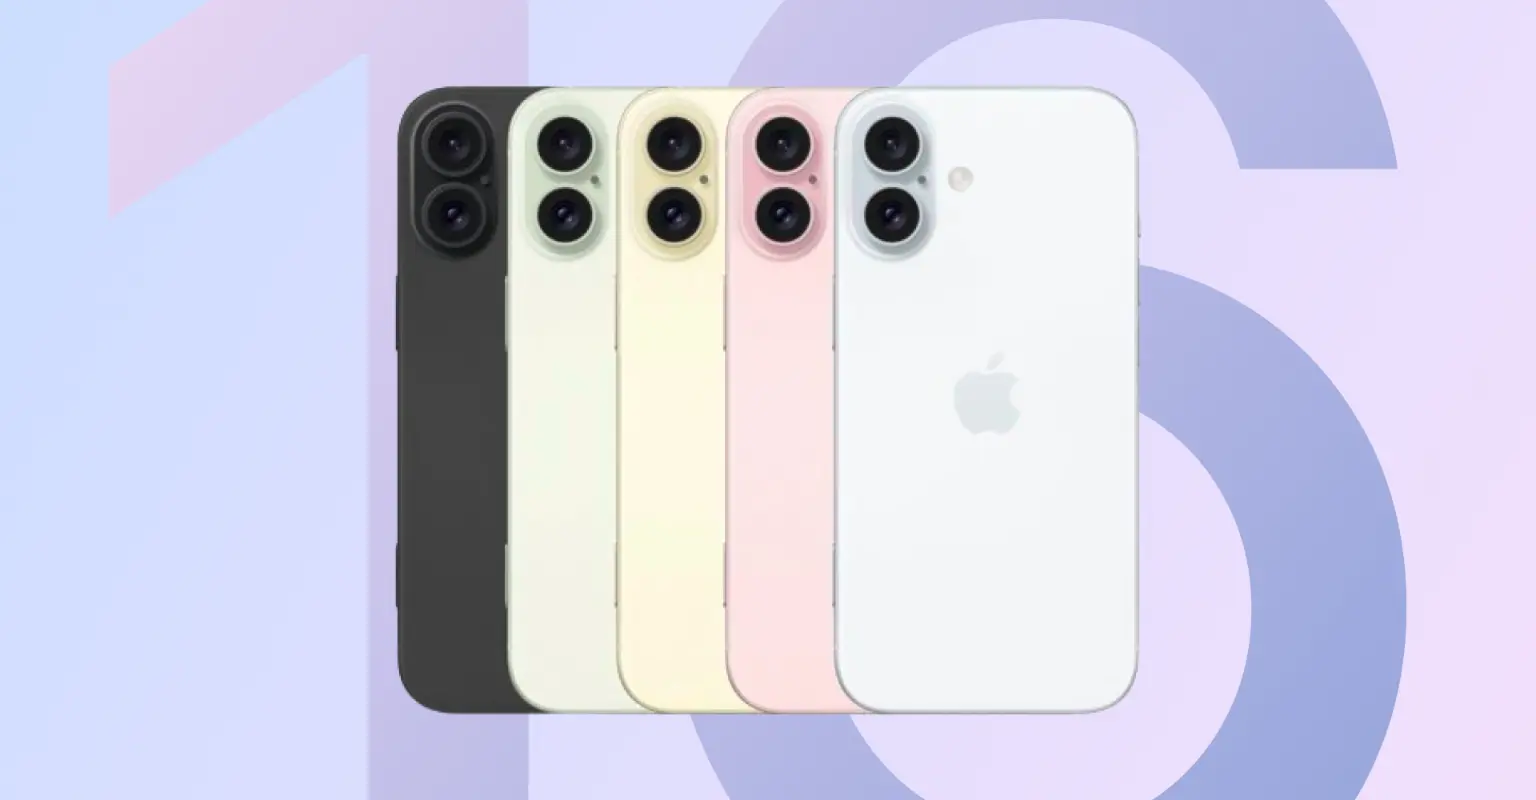 Apple Hub on X: The iPhone 16 has been rumored to feature a vertical  camera layout similar to the iPhone 12 Do you prefer the diagonal or  vertical layout?  / X